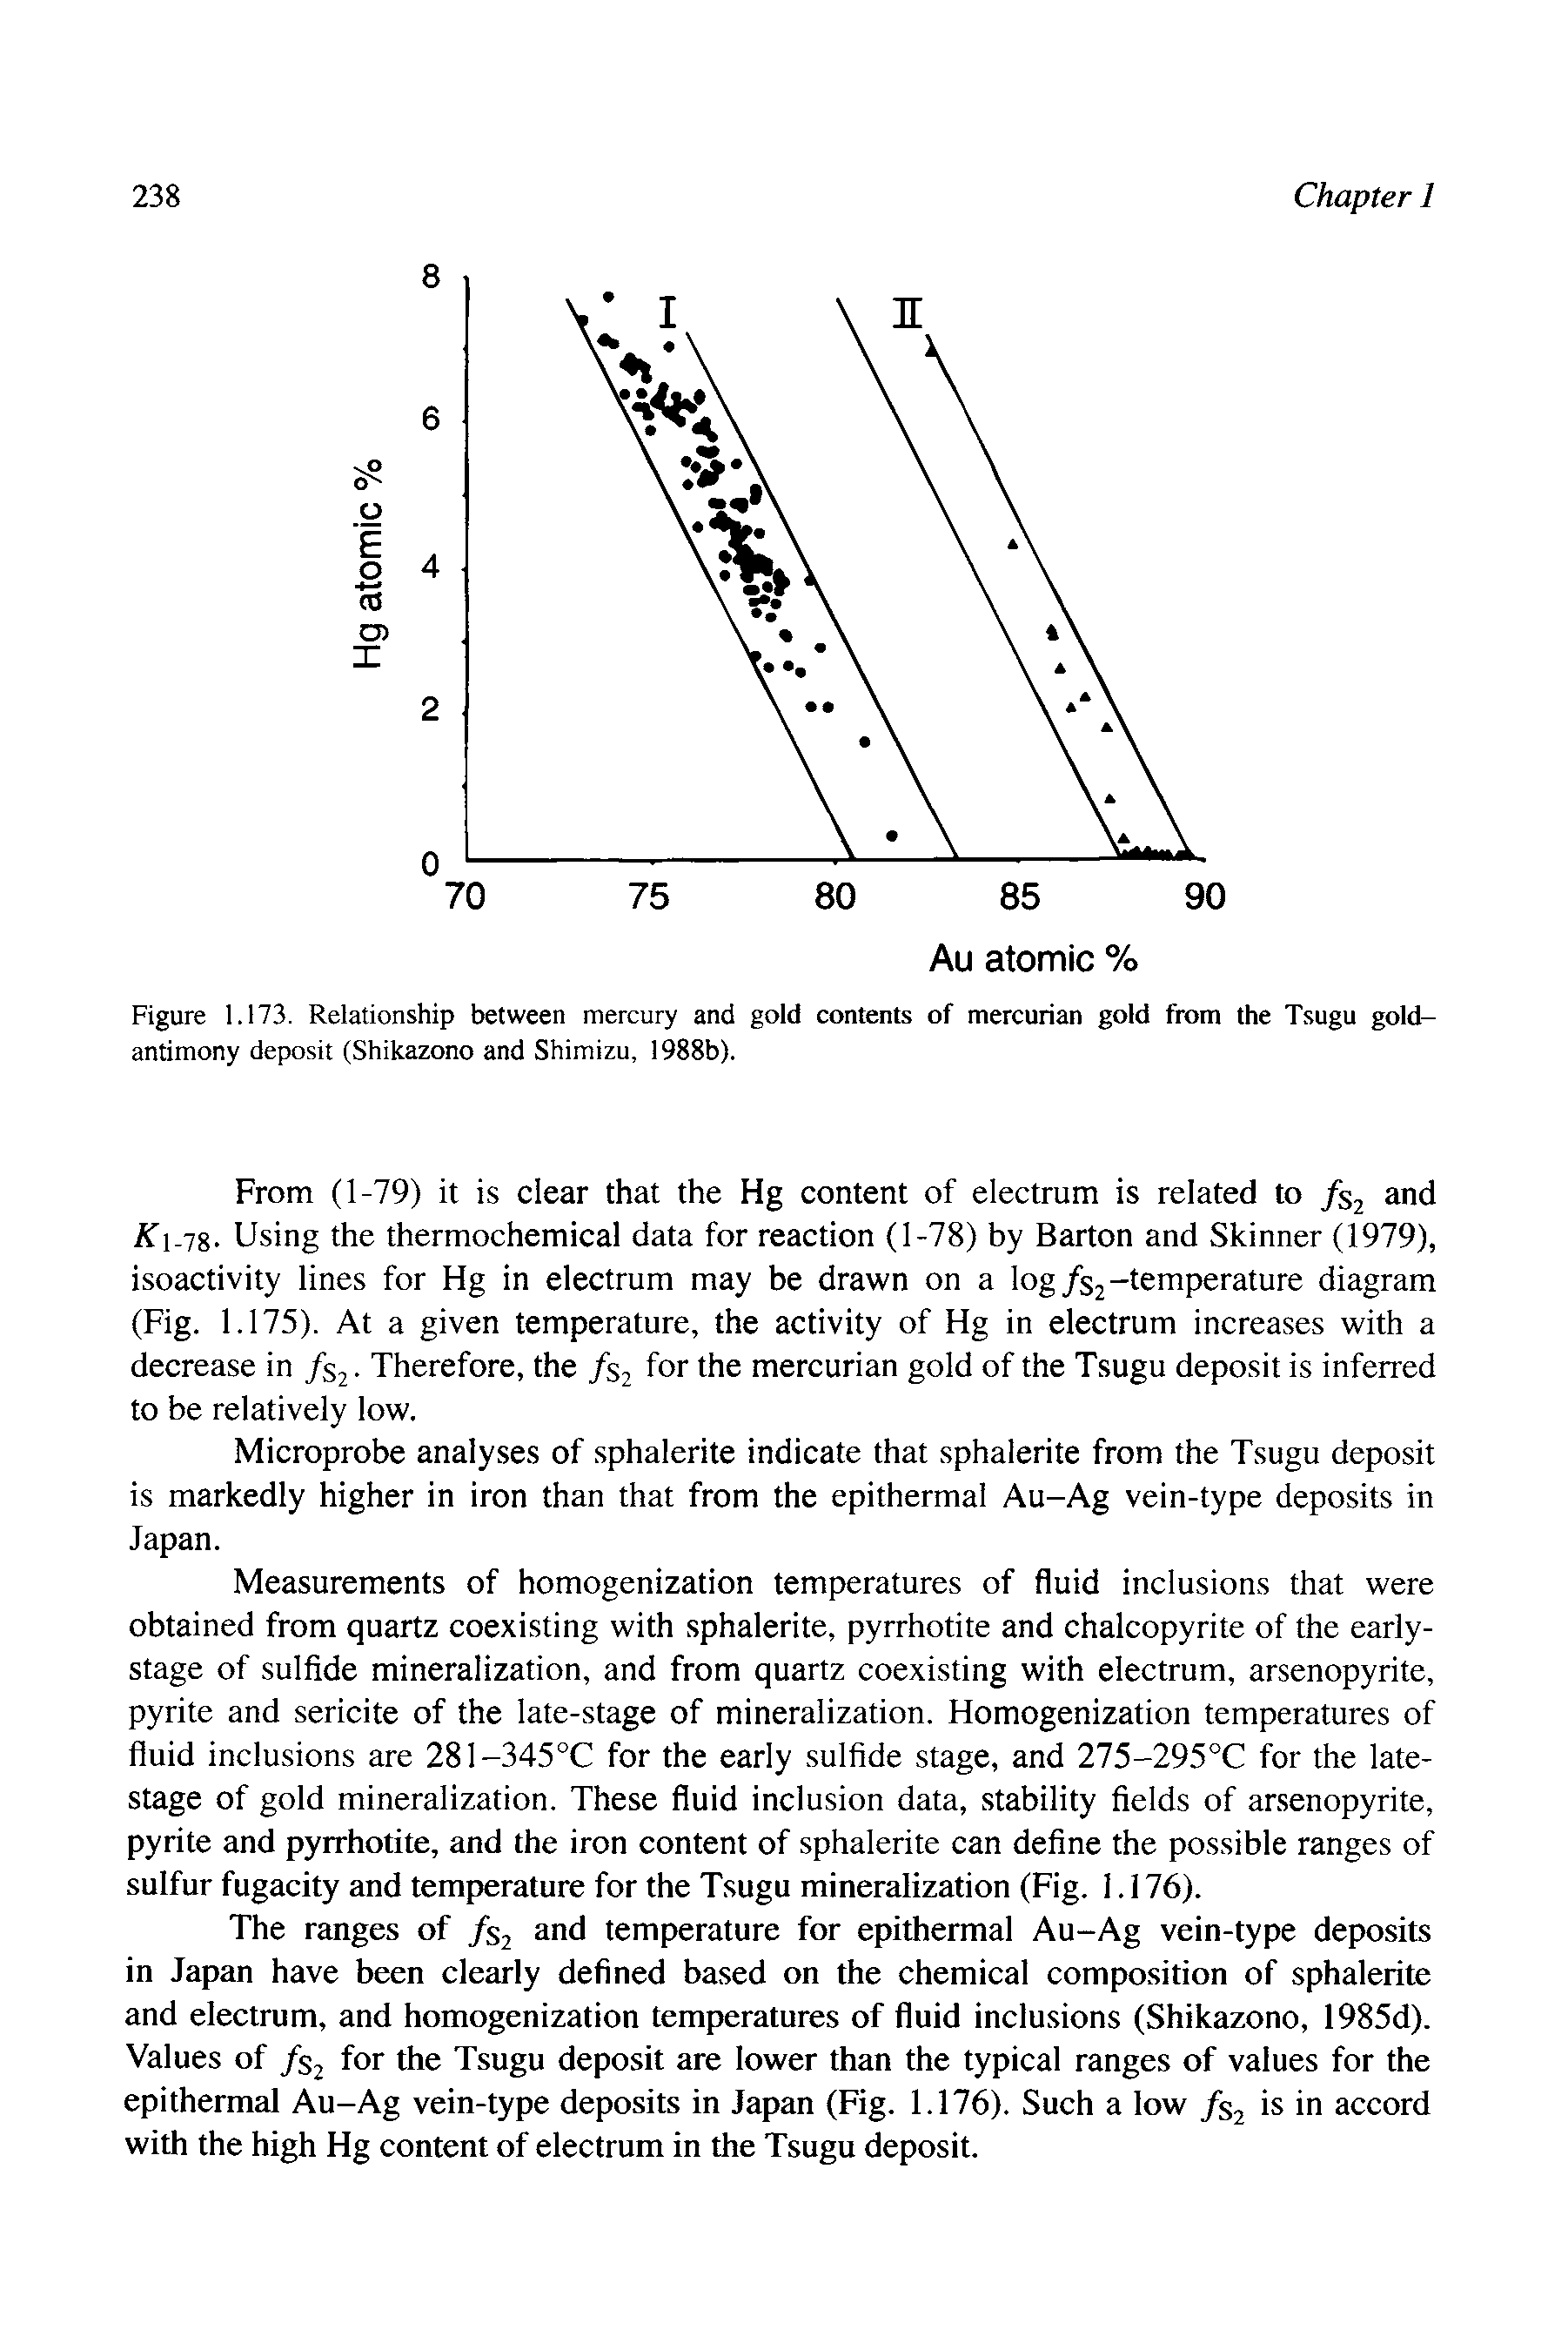 Figure 1.173. Relationship between mercury and gold contents of mercurian gold from the Tsugu gold-antimony deposit (Shikazono and Shimizu, 1988b).